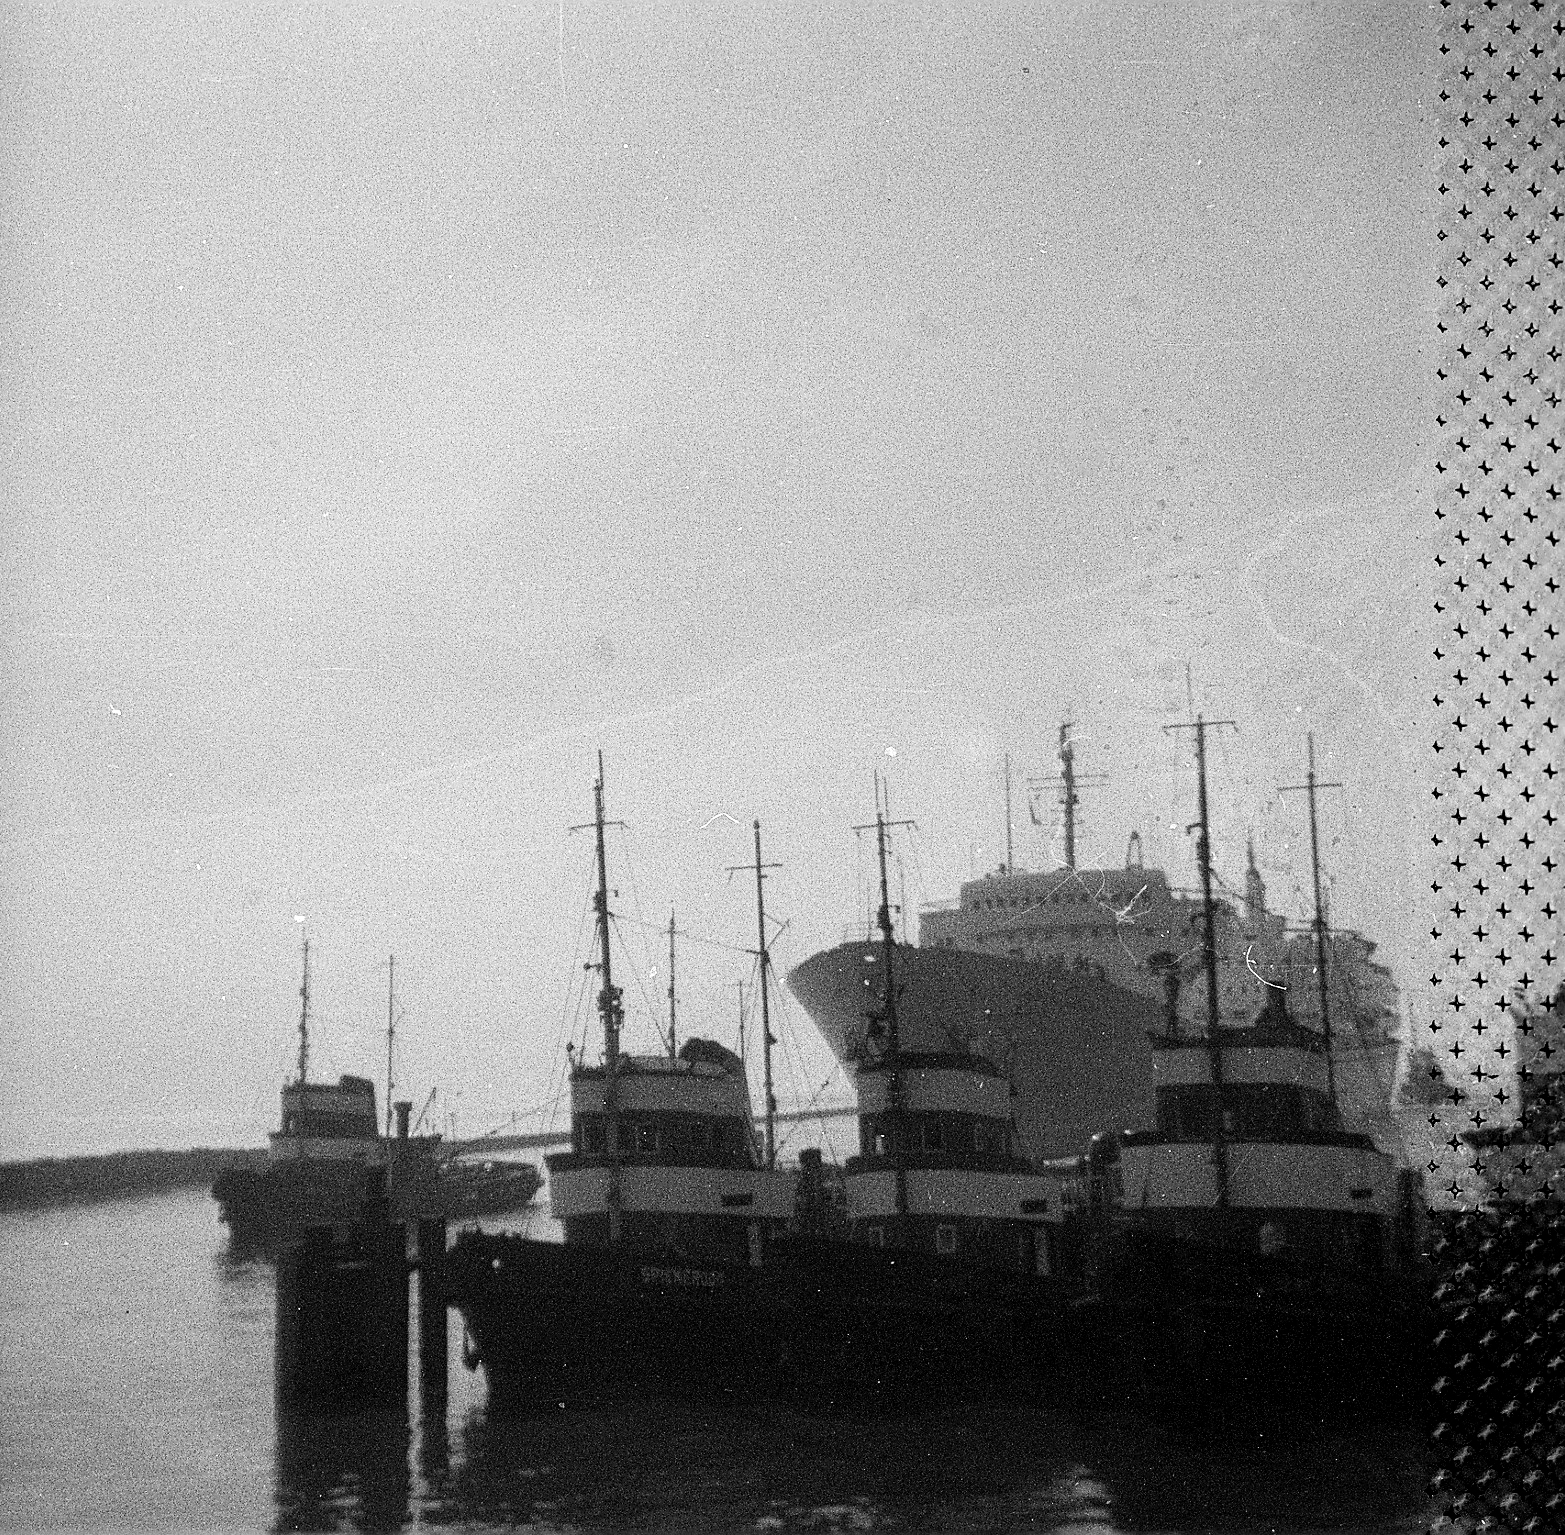 The ships OTTO HAHN and the tugboat Spiekeroog and other tugboats in port Emden. Black & White photo: Erwin Thomasius.